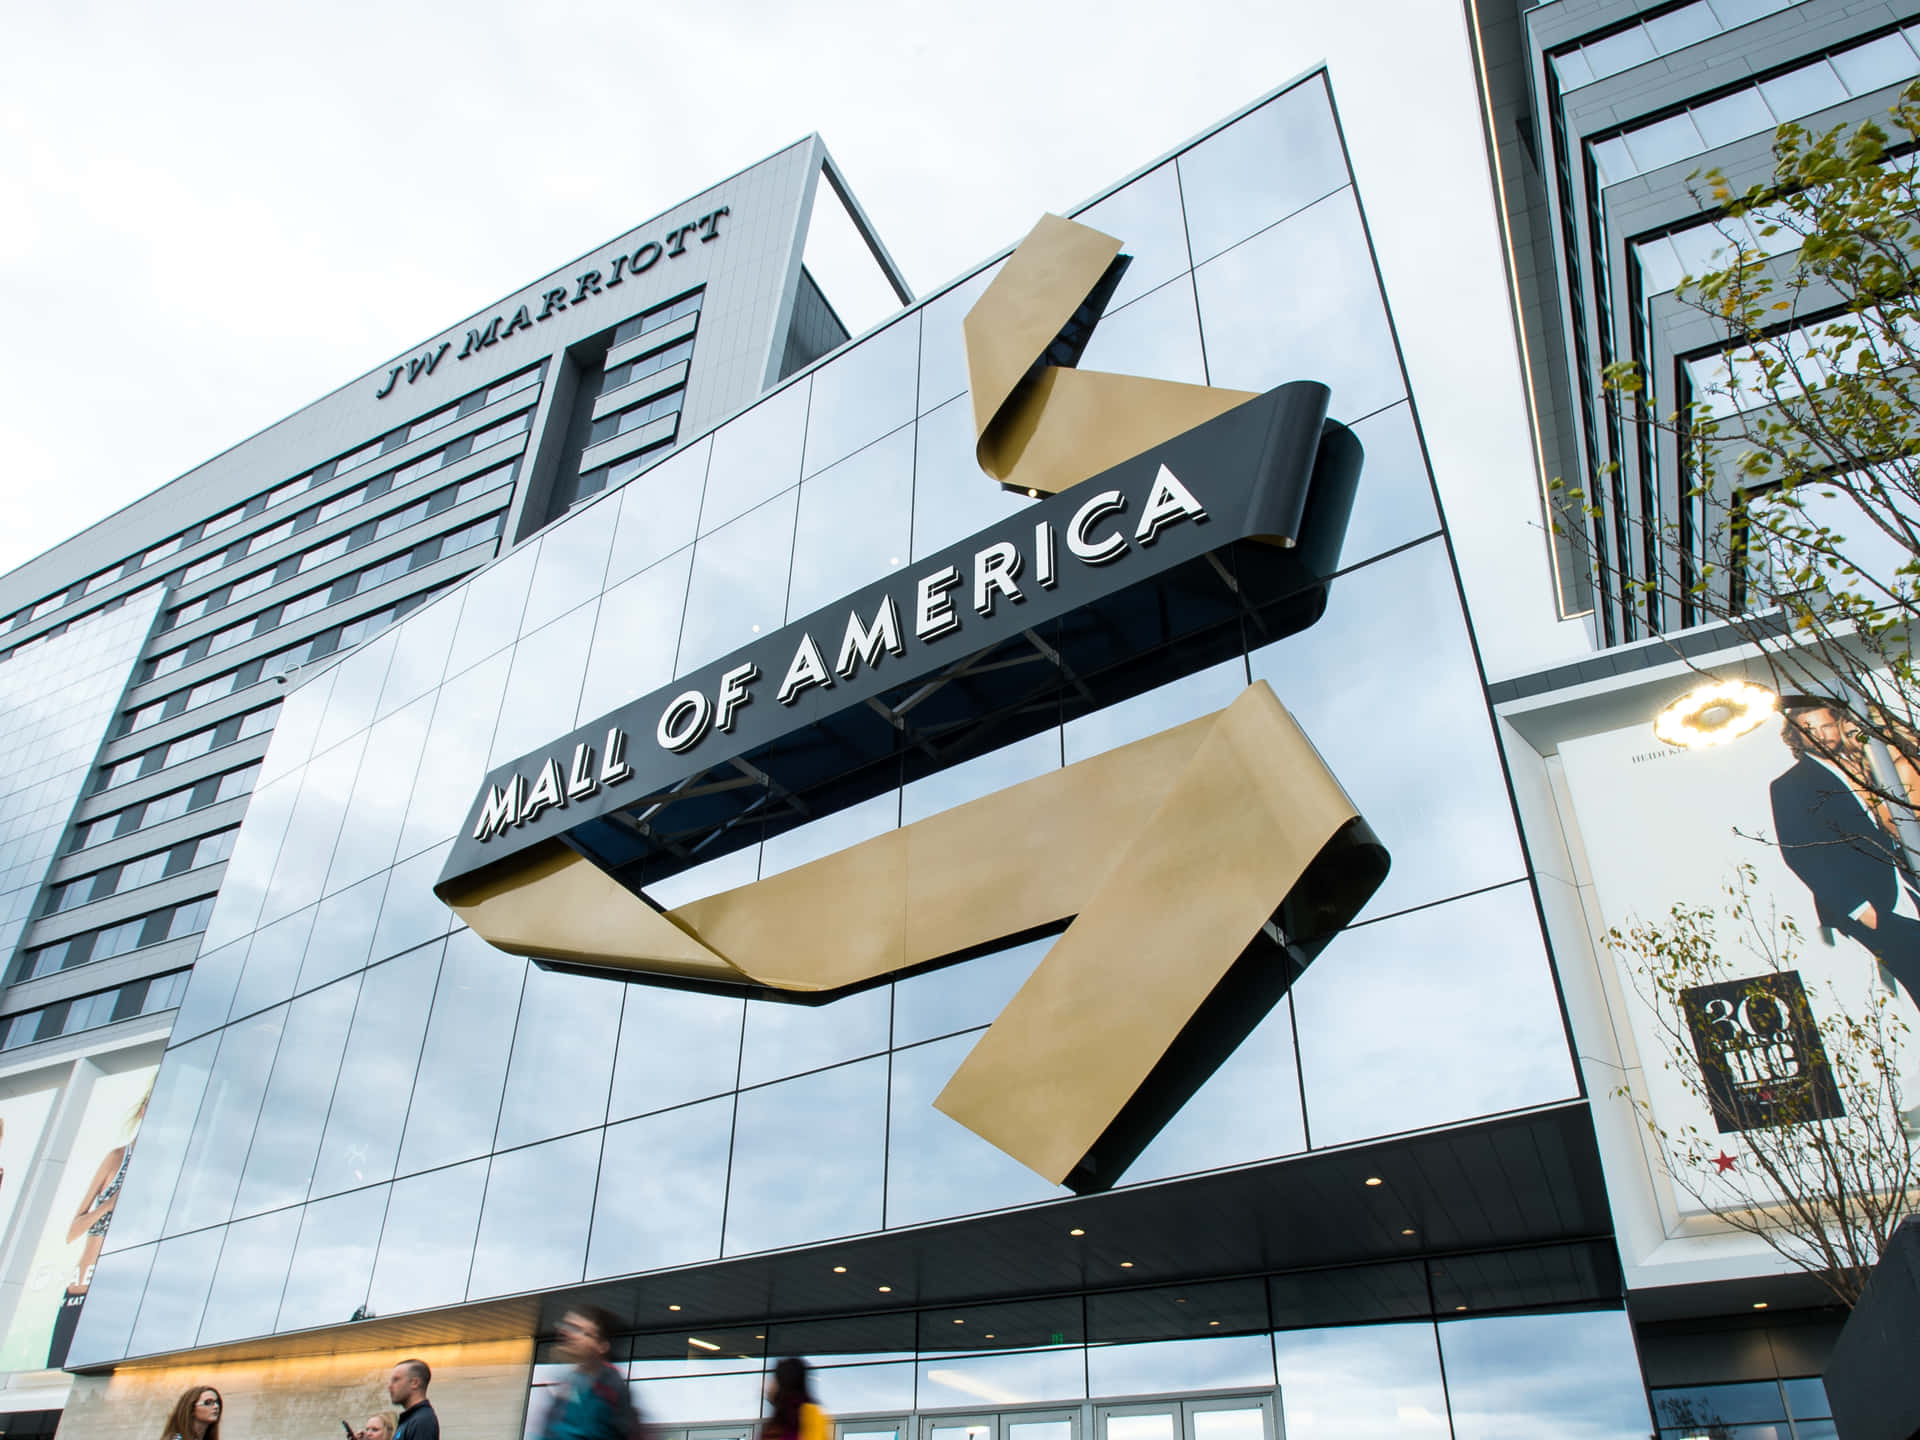 "Visit the Mall of America for World-Class Shopping, Dining, and Entertainment Options!"